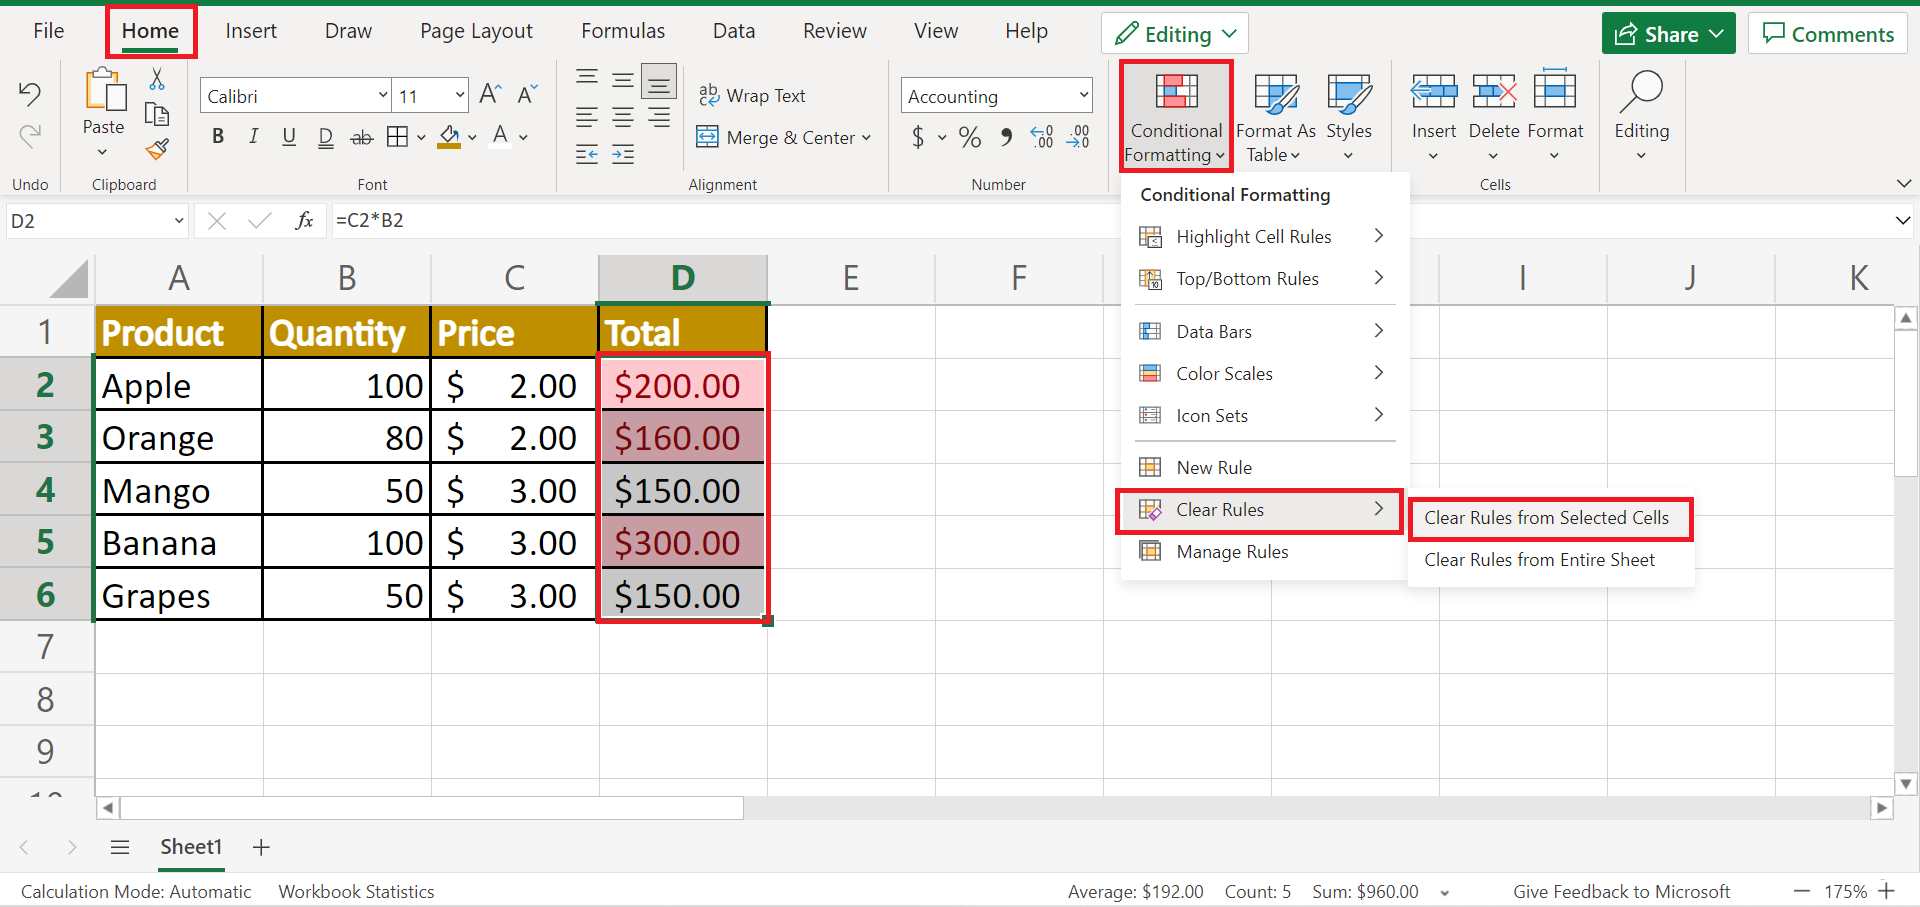 Compress File More than 100MB in Excel